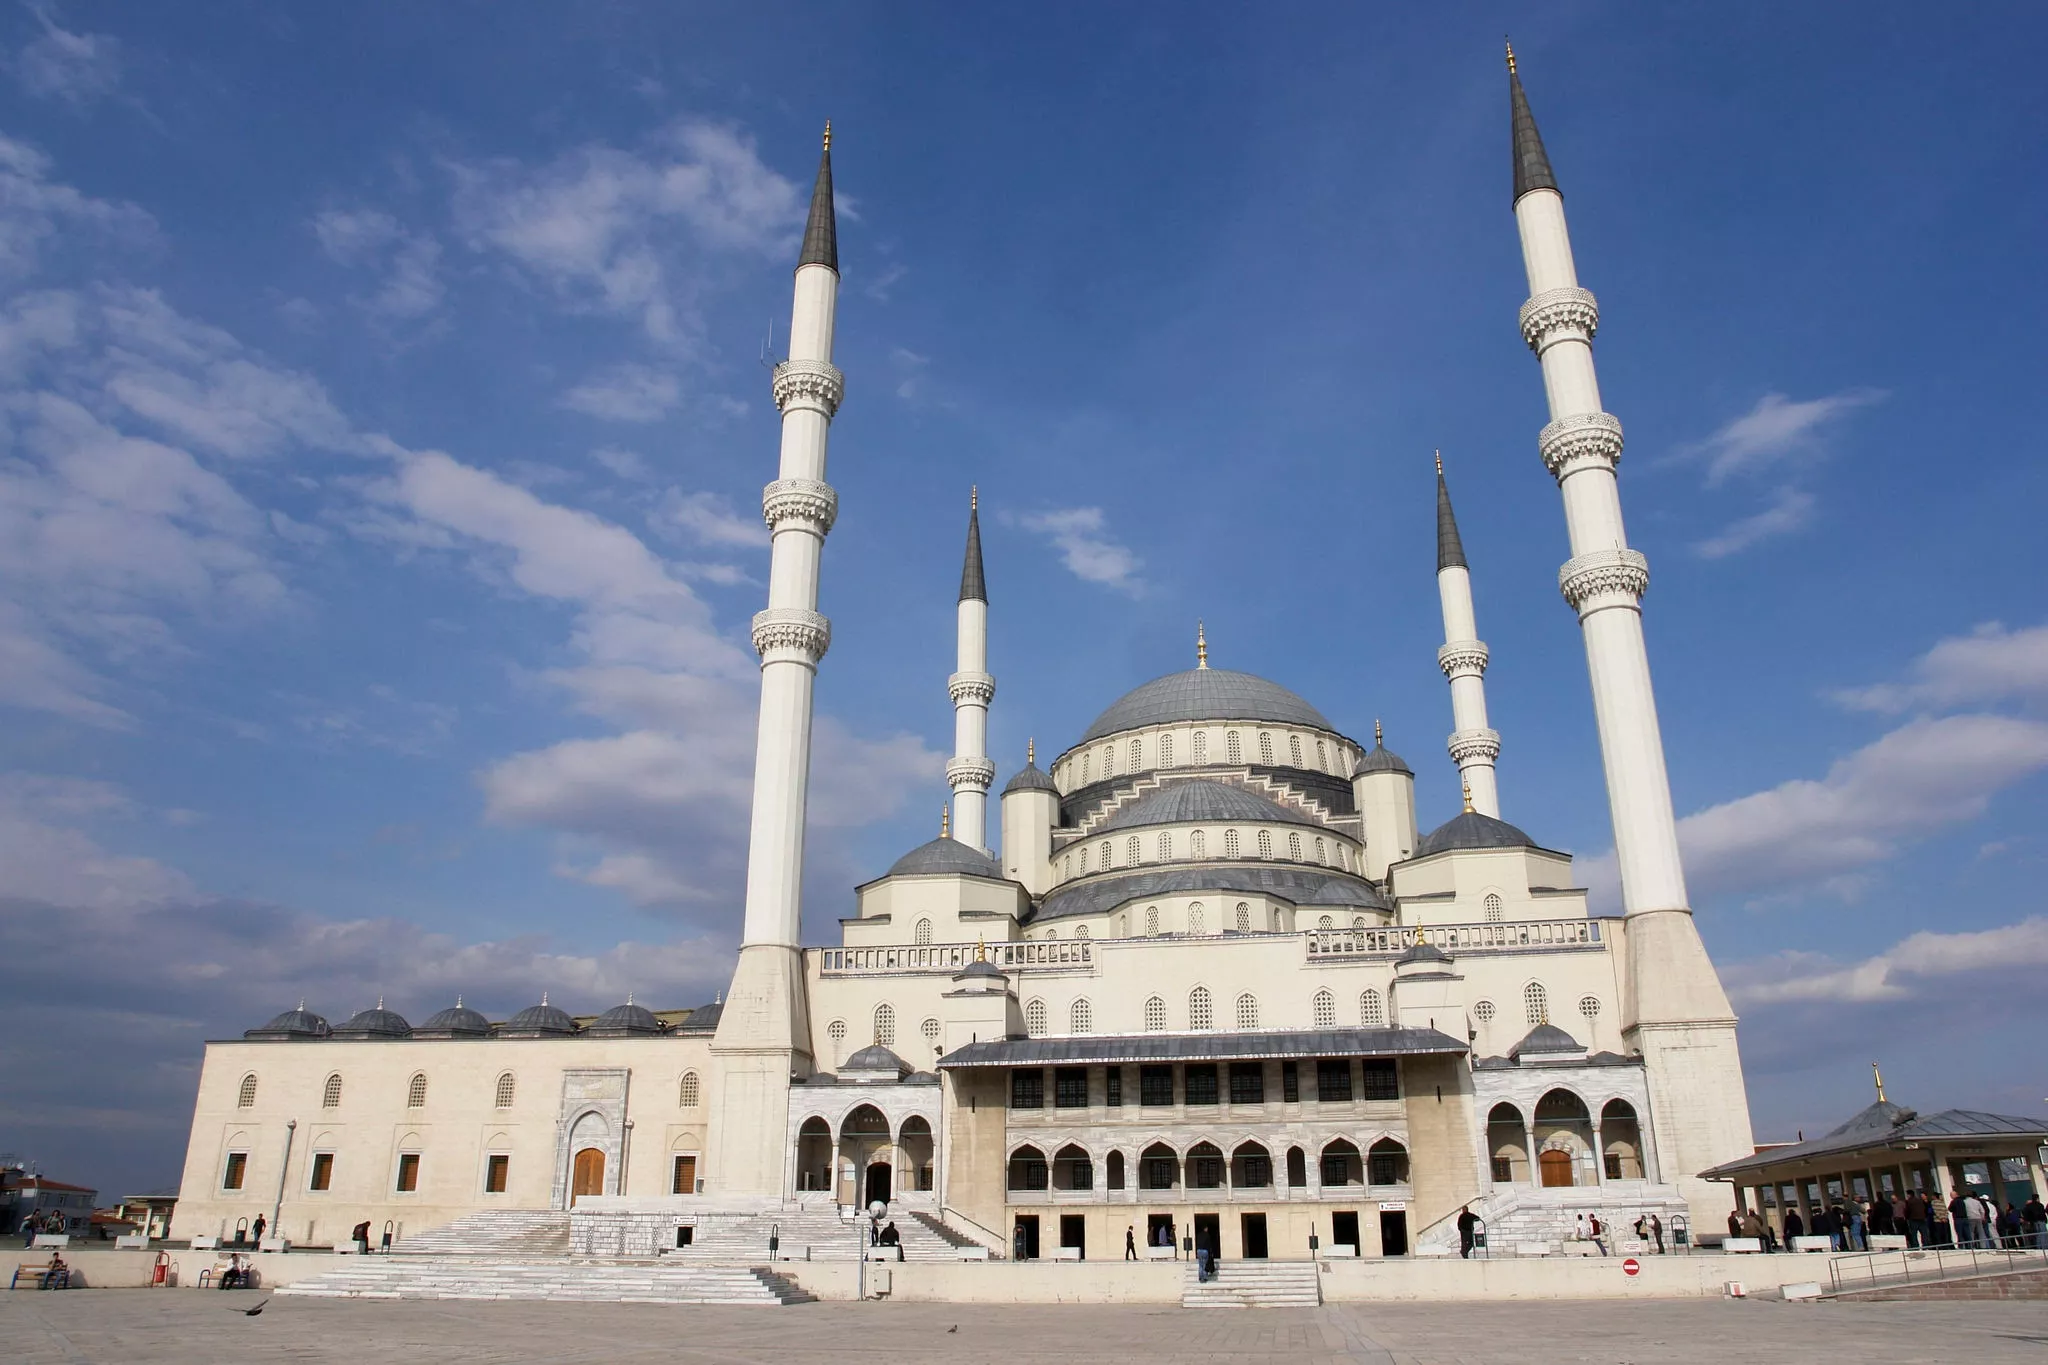 Kocatepe Mosque in Turkey, Central Asia | Architecture - Rated 4